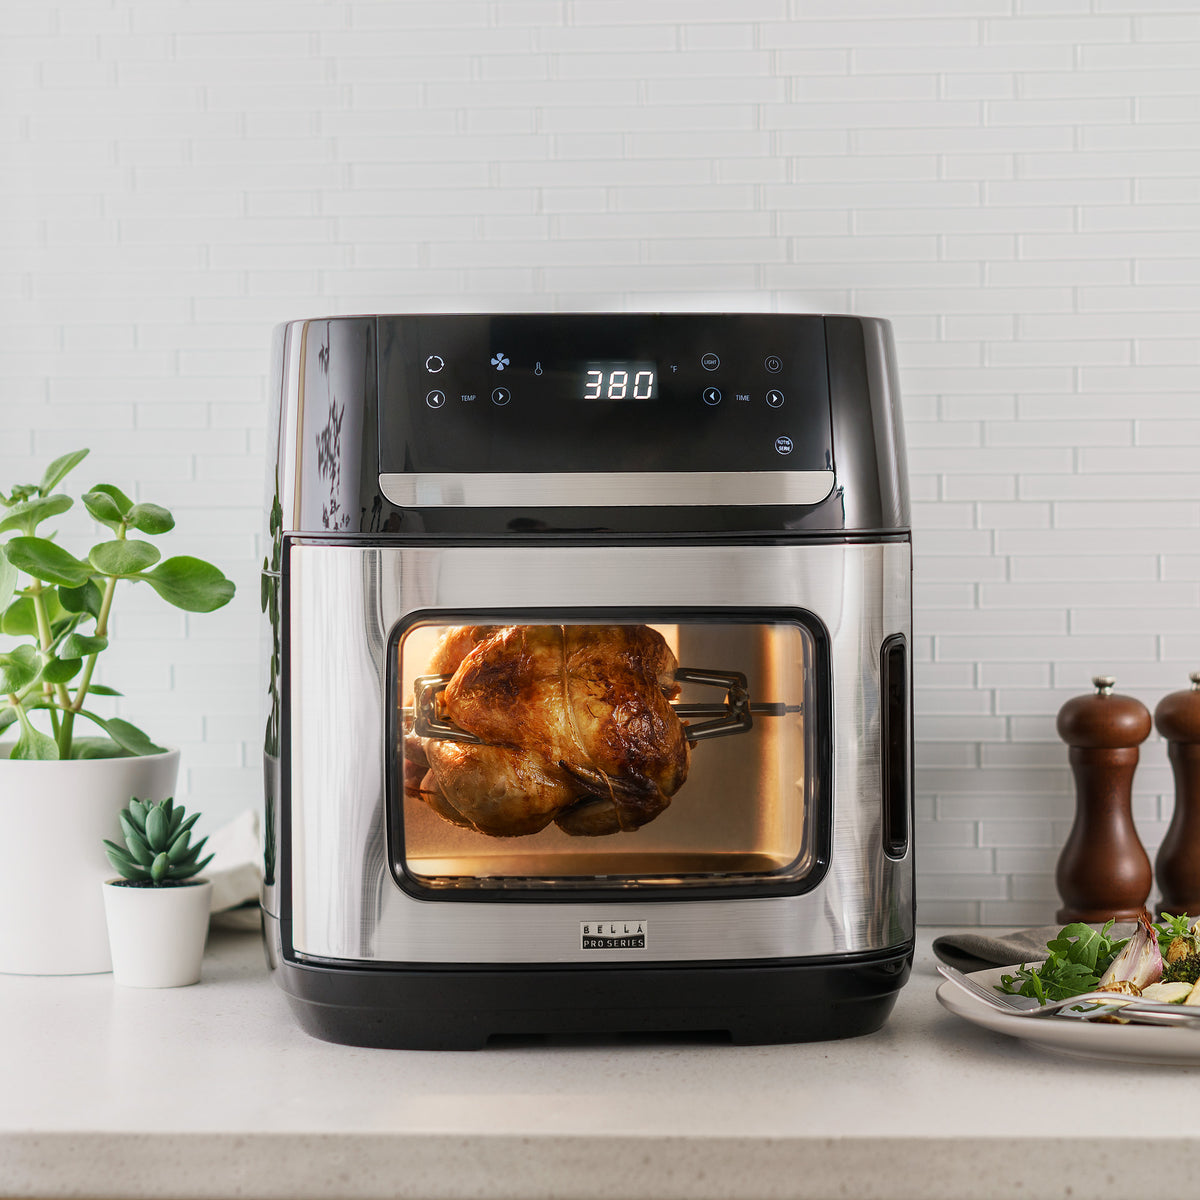 Bella Pro Series - 6-qt. Digital Air Fryer with Stainless Finish - SS (bb)